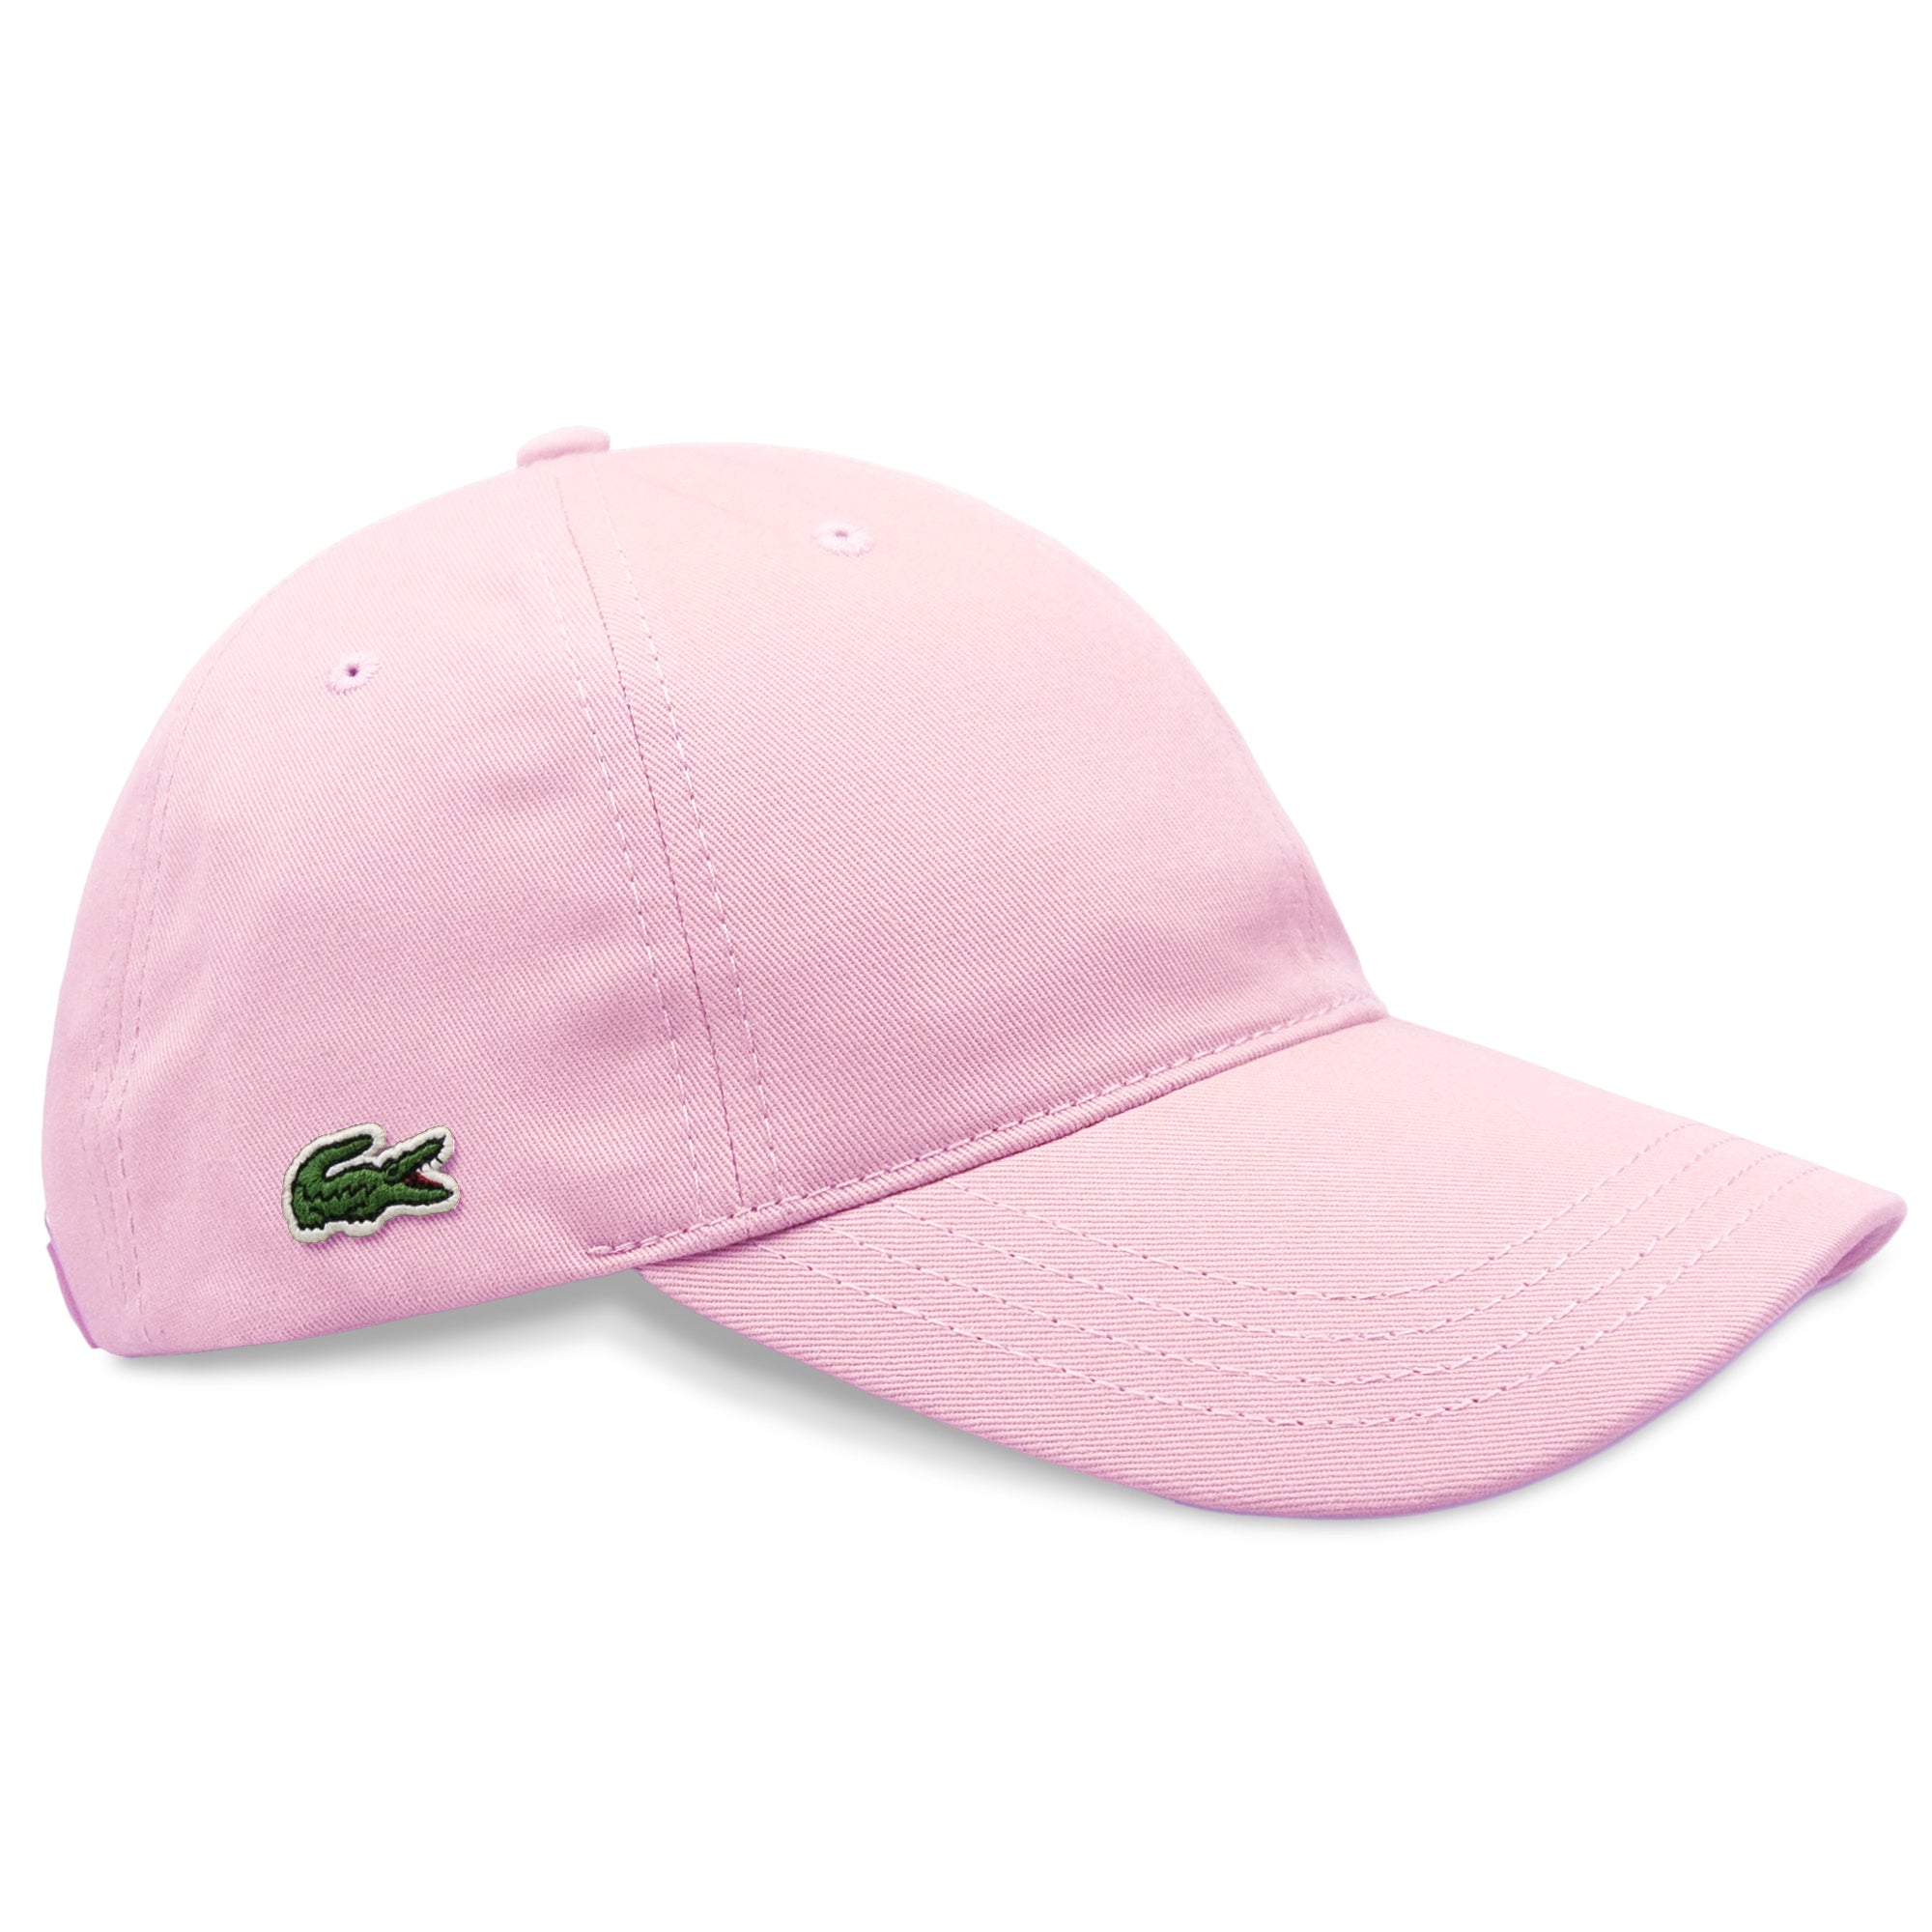 Lacoste RK4709 Embroidered Cotton Cap - Pink